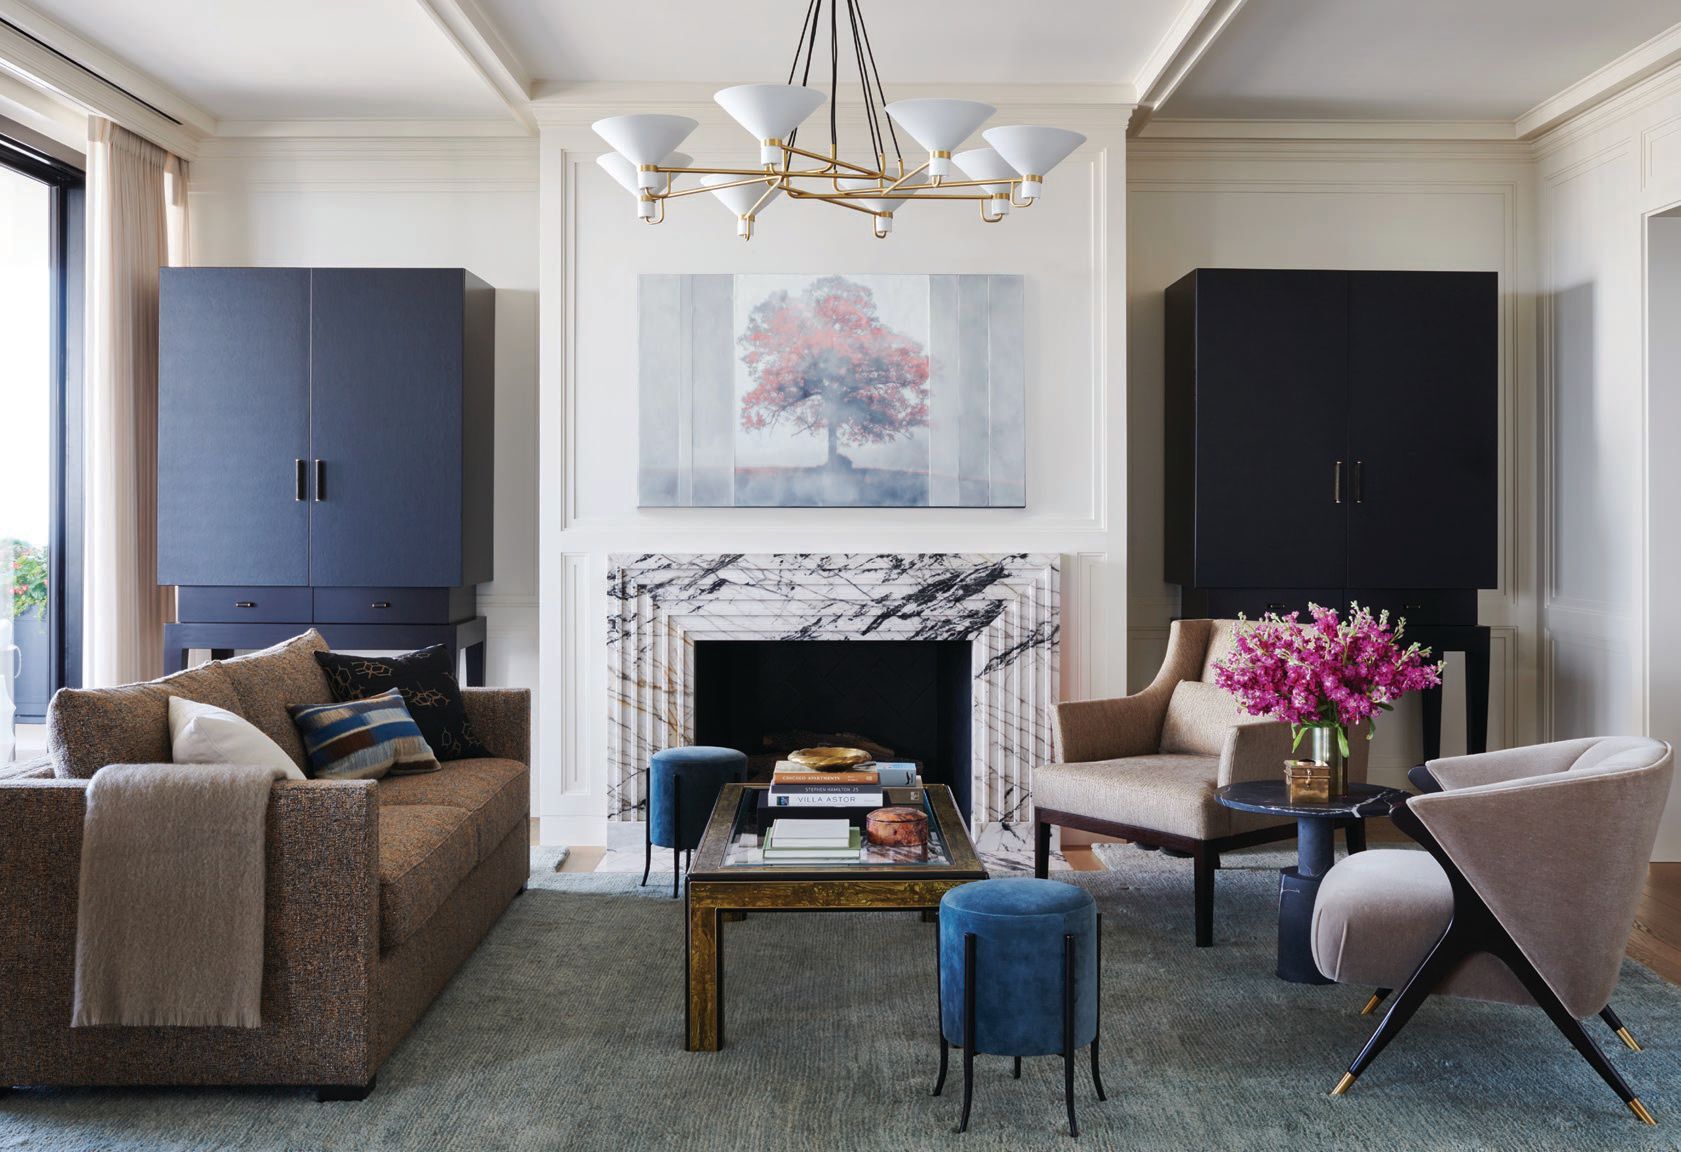 The library is anchored by a Mastercraft acid-etched brass and black lacquer coffee table by Bernhard Rohne, Jonathan Browning Studios' Lauriston circular chandelier and artist Tom Brydelsky's work "Tree with Red Leaves," sourced from Gruen Galleries Photographed by Richard Powers